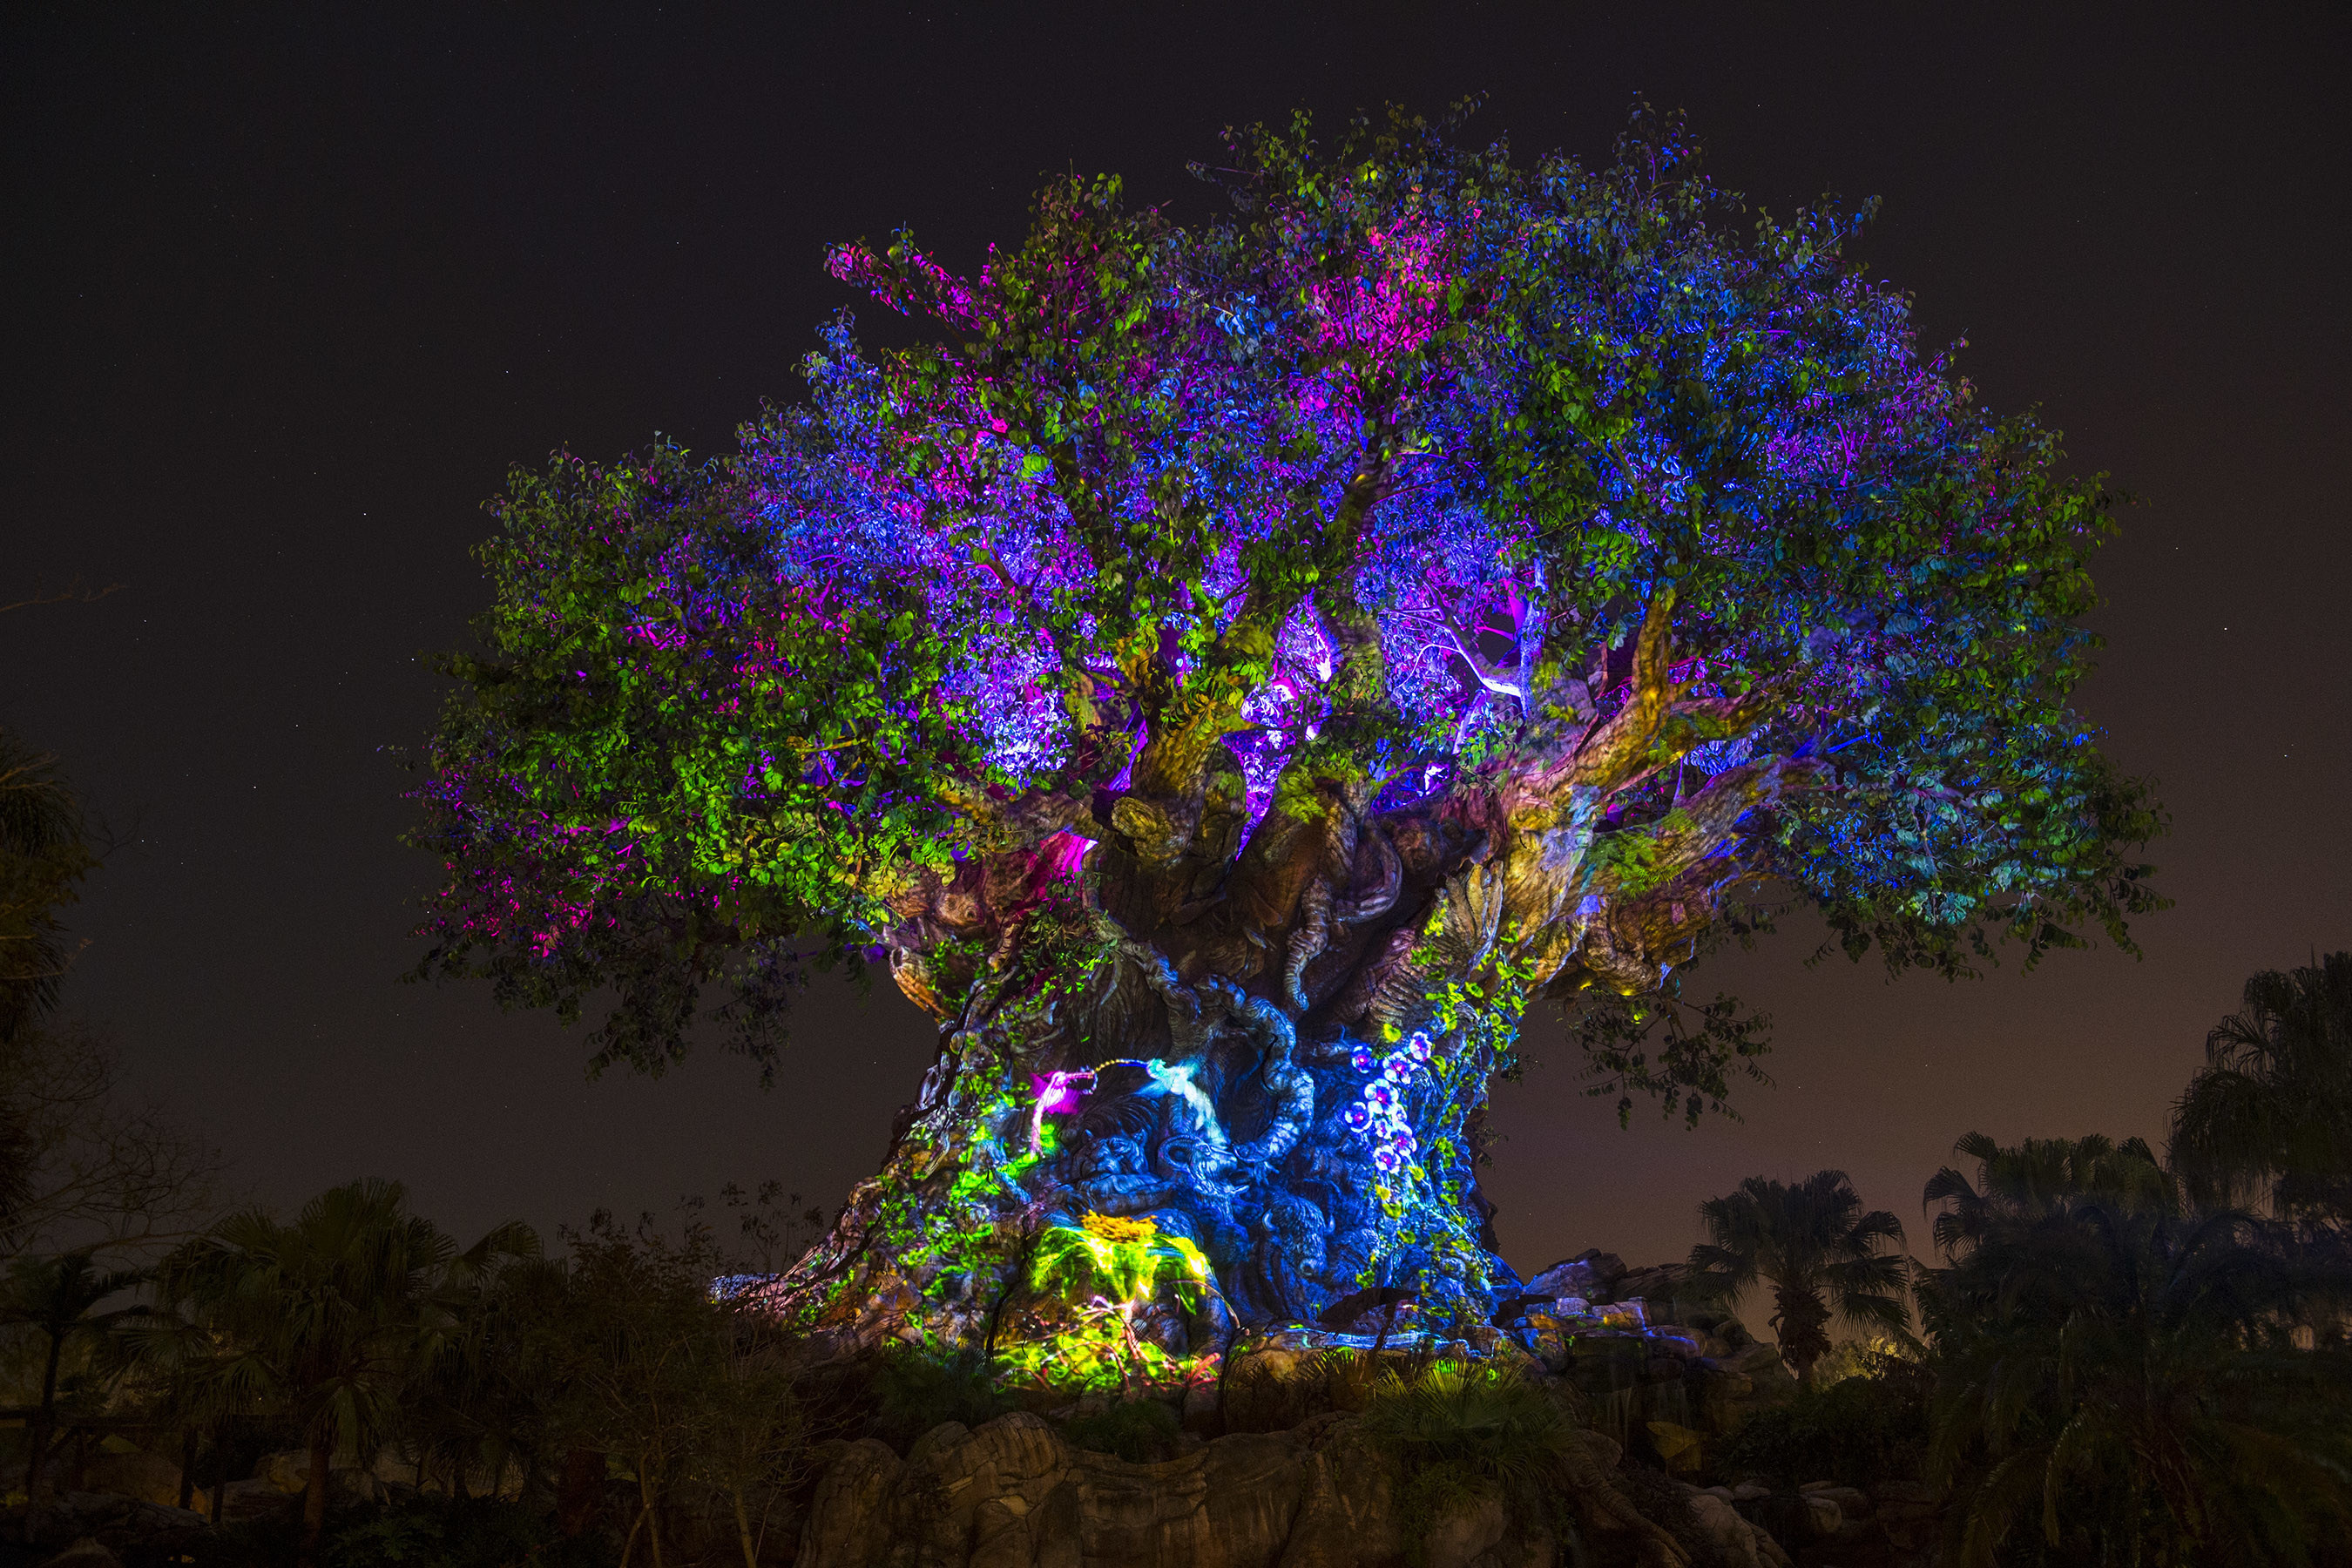 Disney's Animal Kingdom's iconic Tree of Life will undergo extraordinary "awakenings" throughout each evening as the animal spirits are brought to life by magical fireflies that reveal colorful stories of wonder and enchantment. Projections of nature scenes take on a magical quality as they appear to dramatically emanate from within the Tree of Life. (David Roark, photographer)